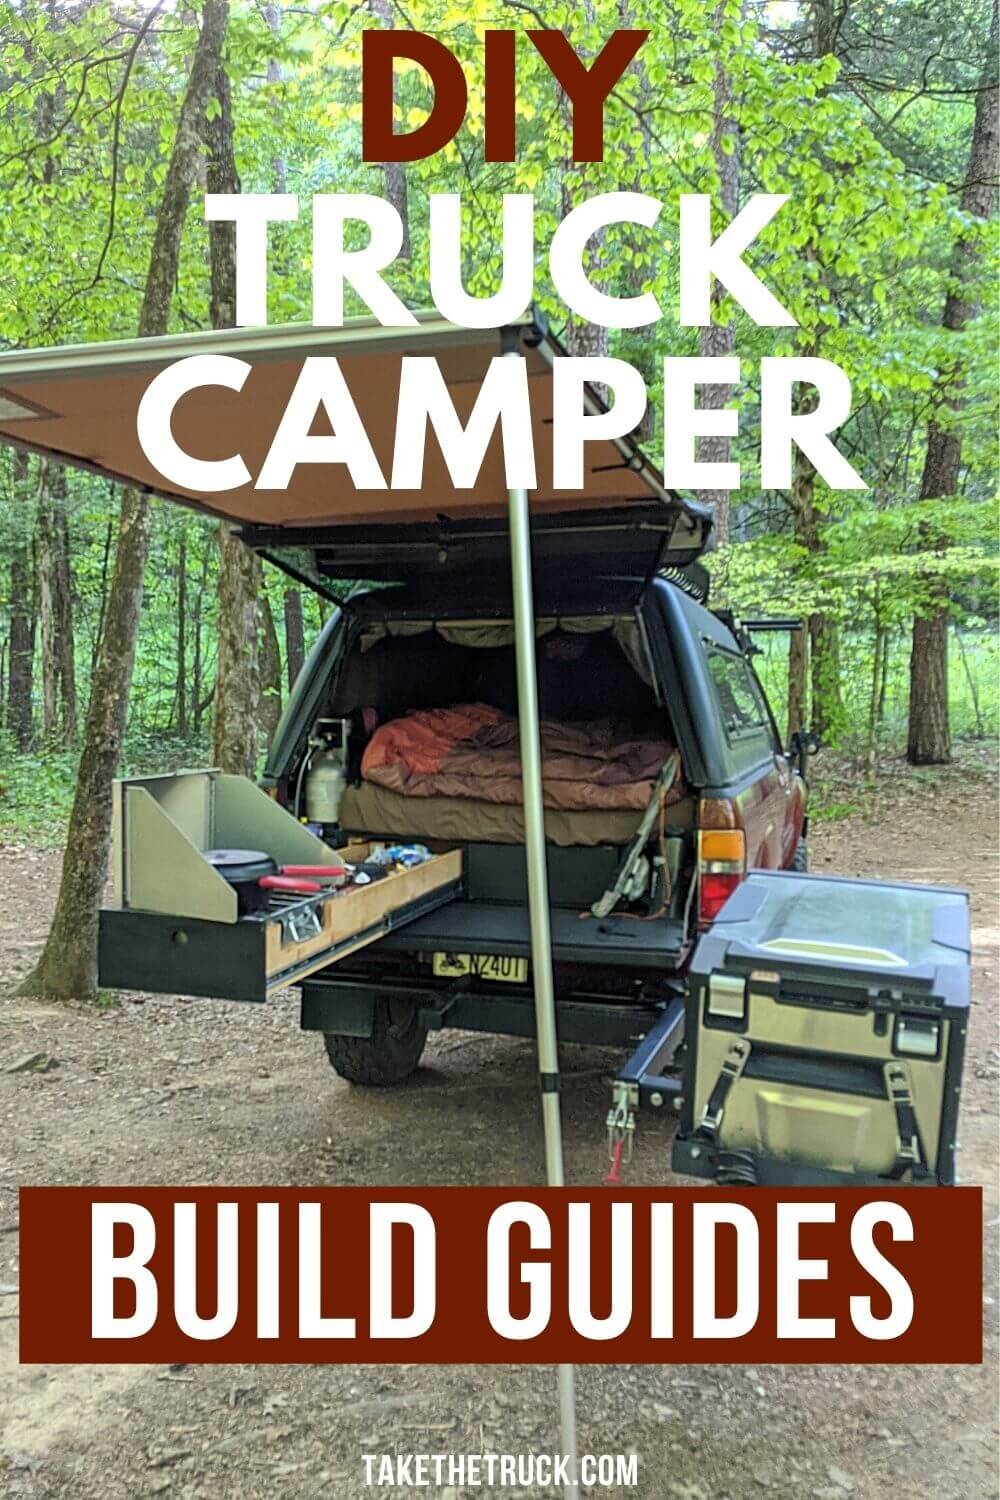 Build the Ultimate DIY Truck Camper and Overlanding Rig | Take The Truck